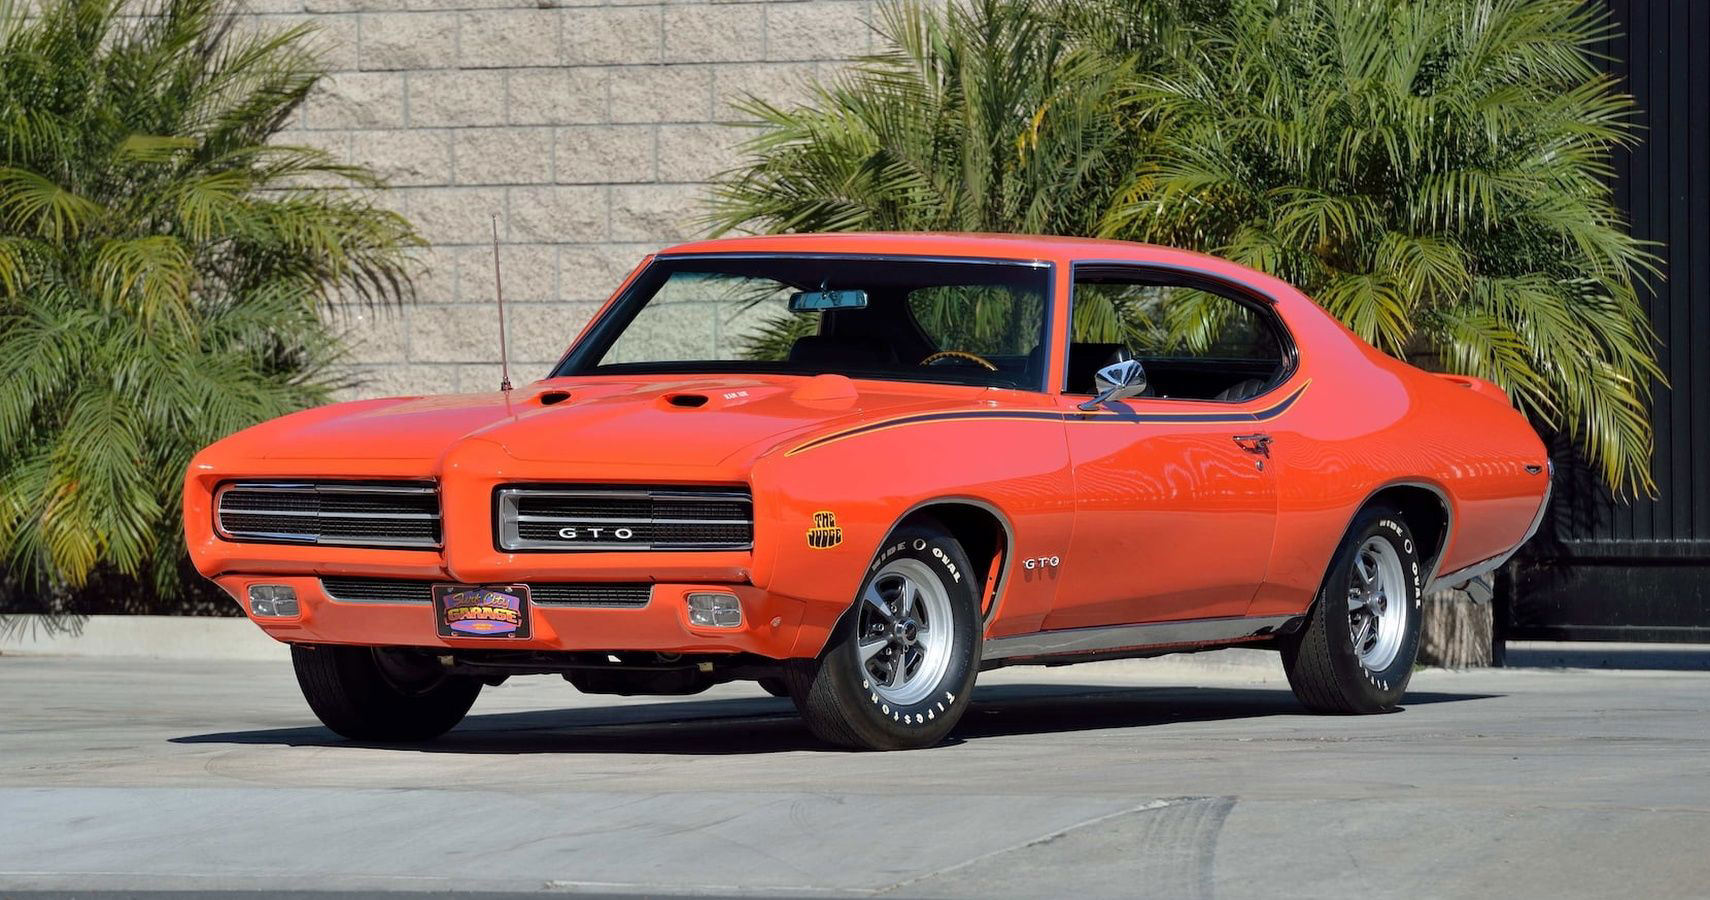 10 Unforgettable American Muscle Cars From The '60s